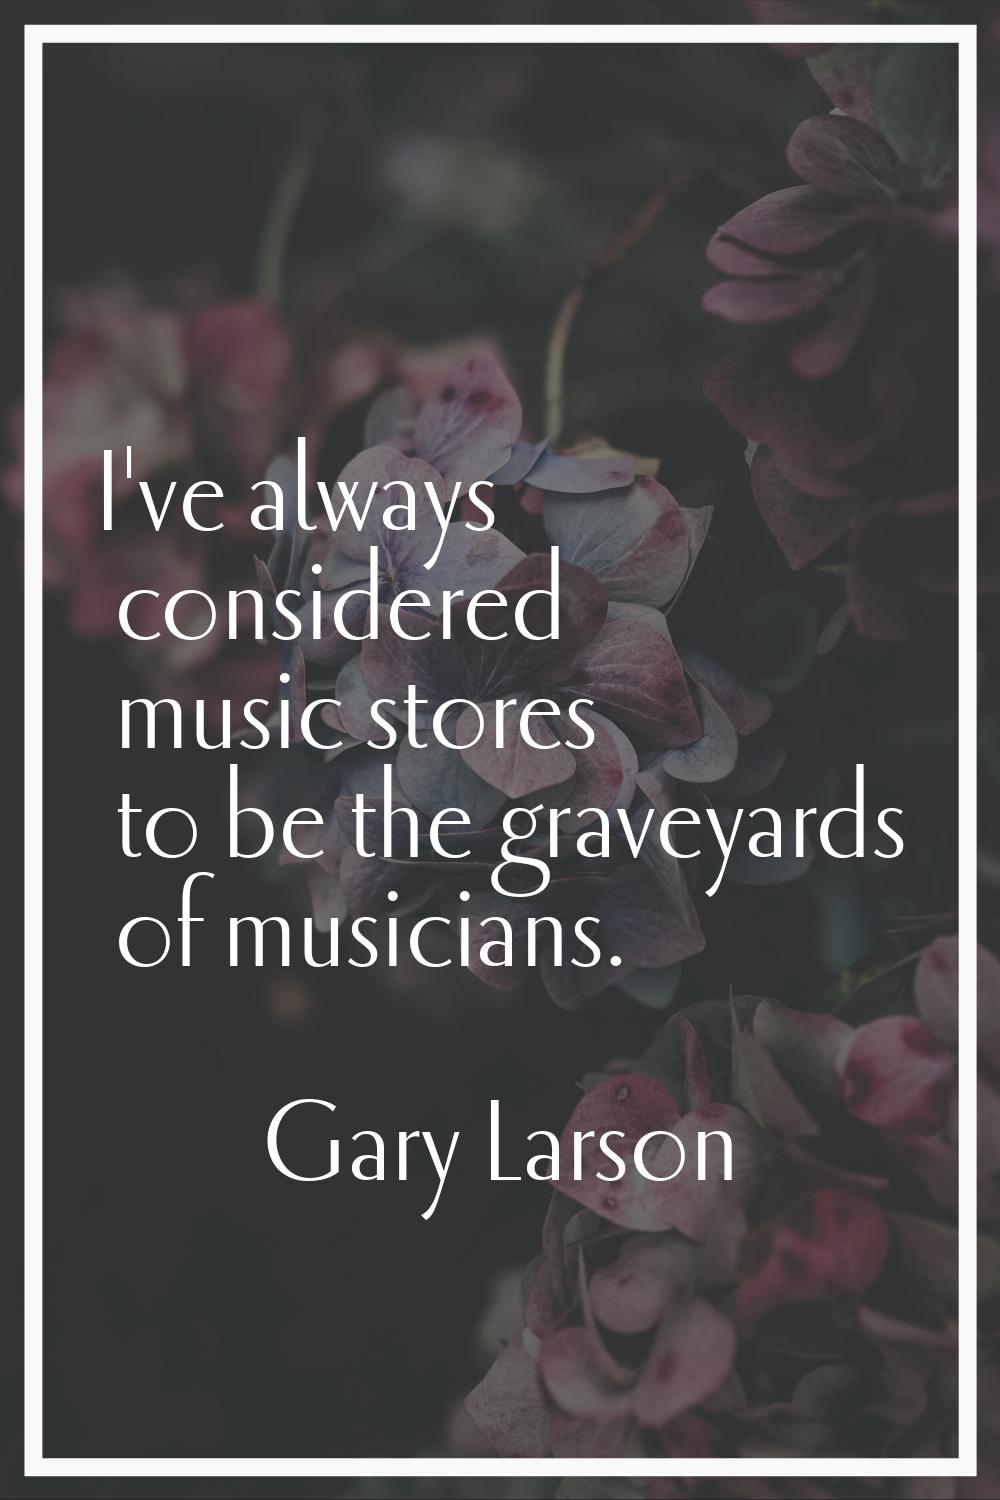 I've always considered music stores to be the graveyards of musicians.